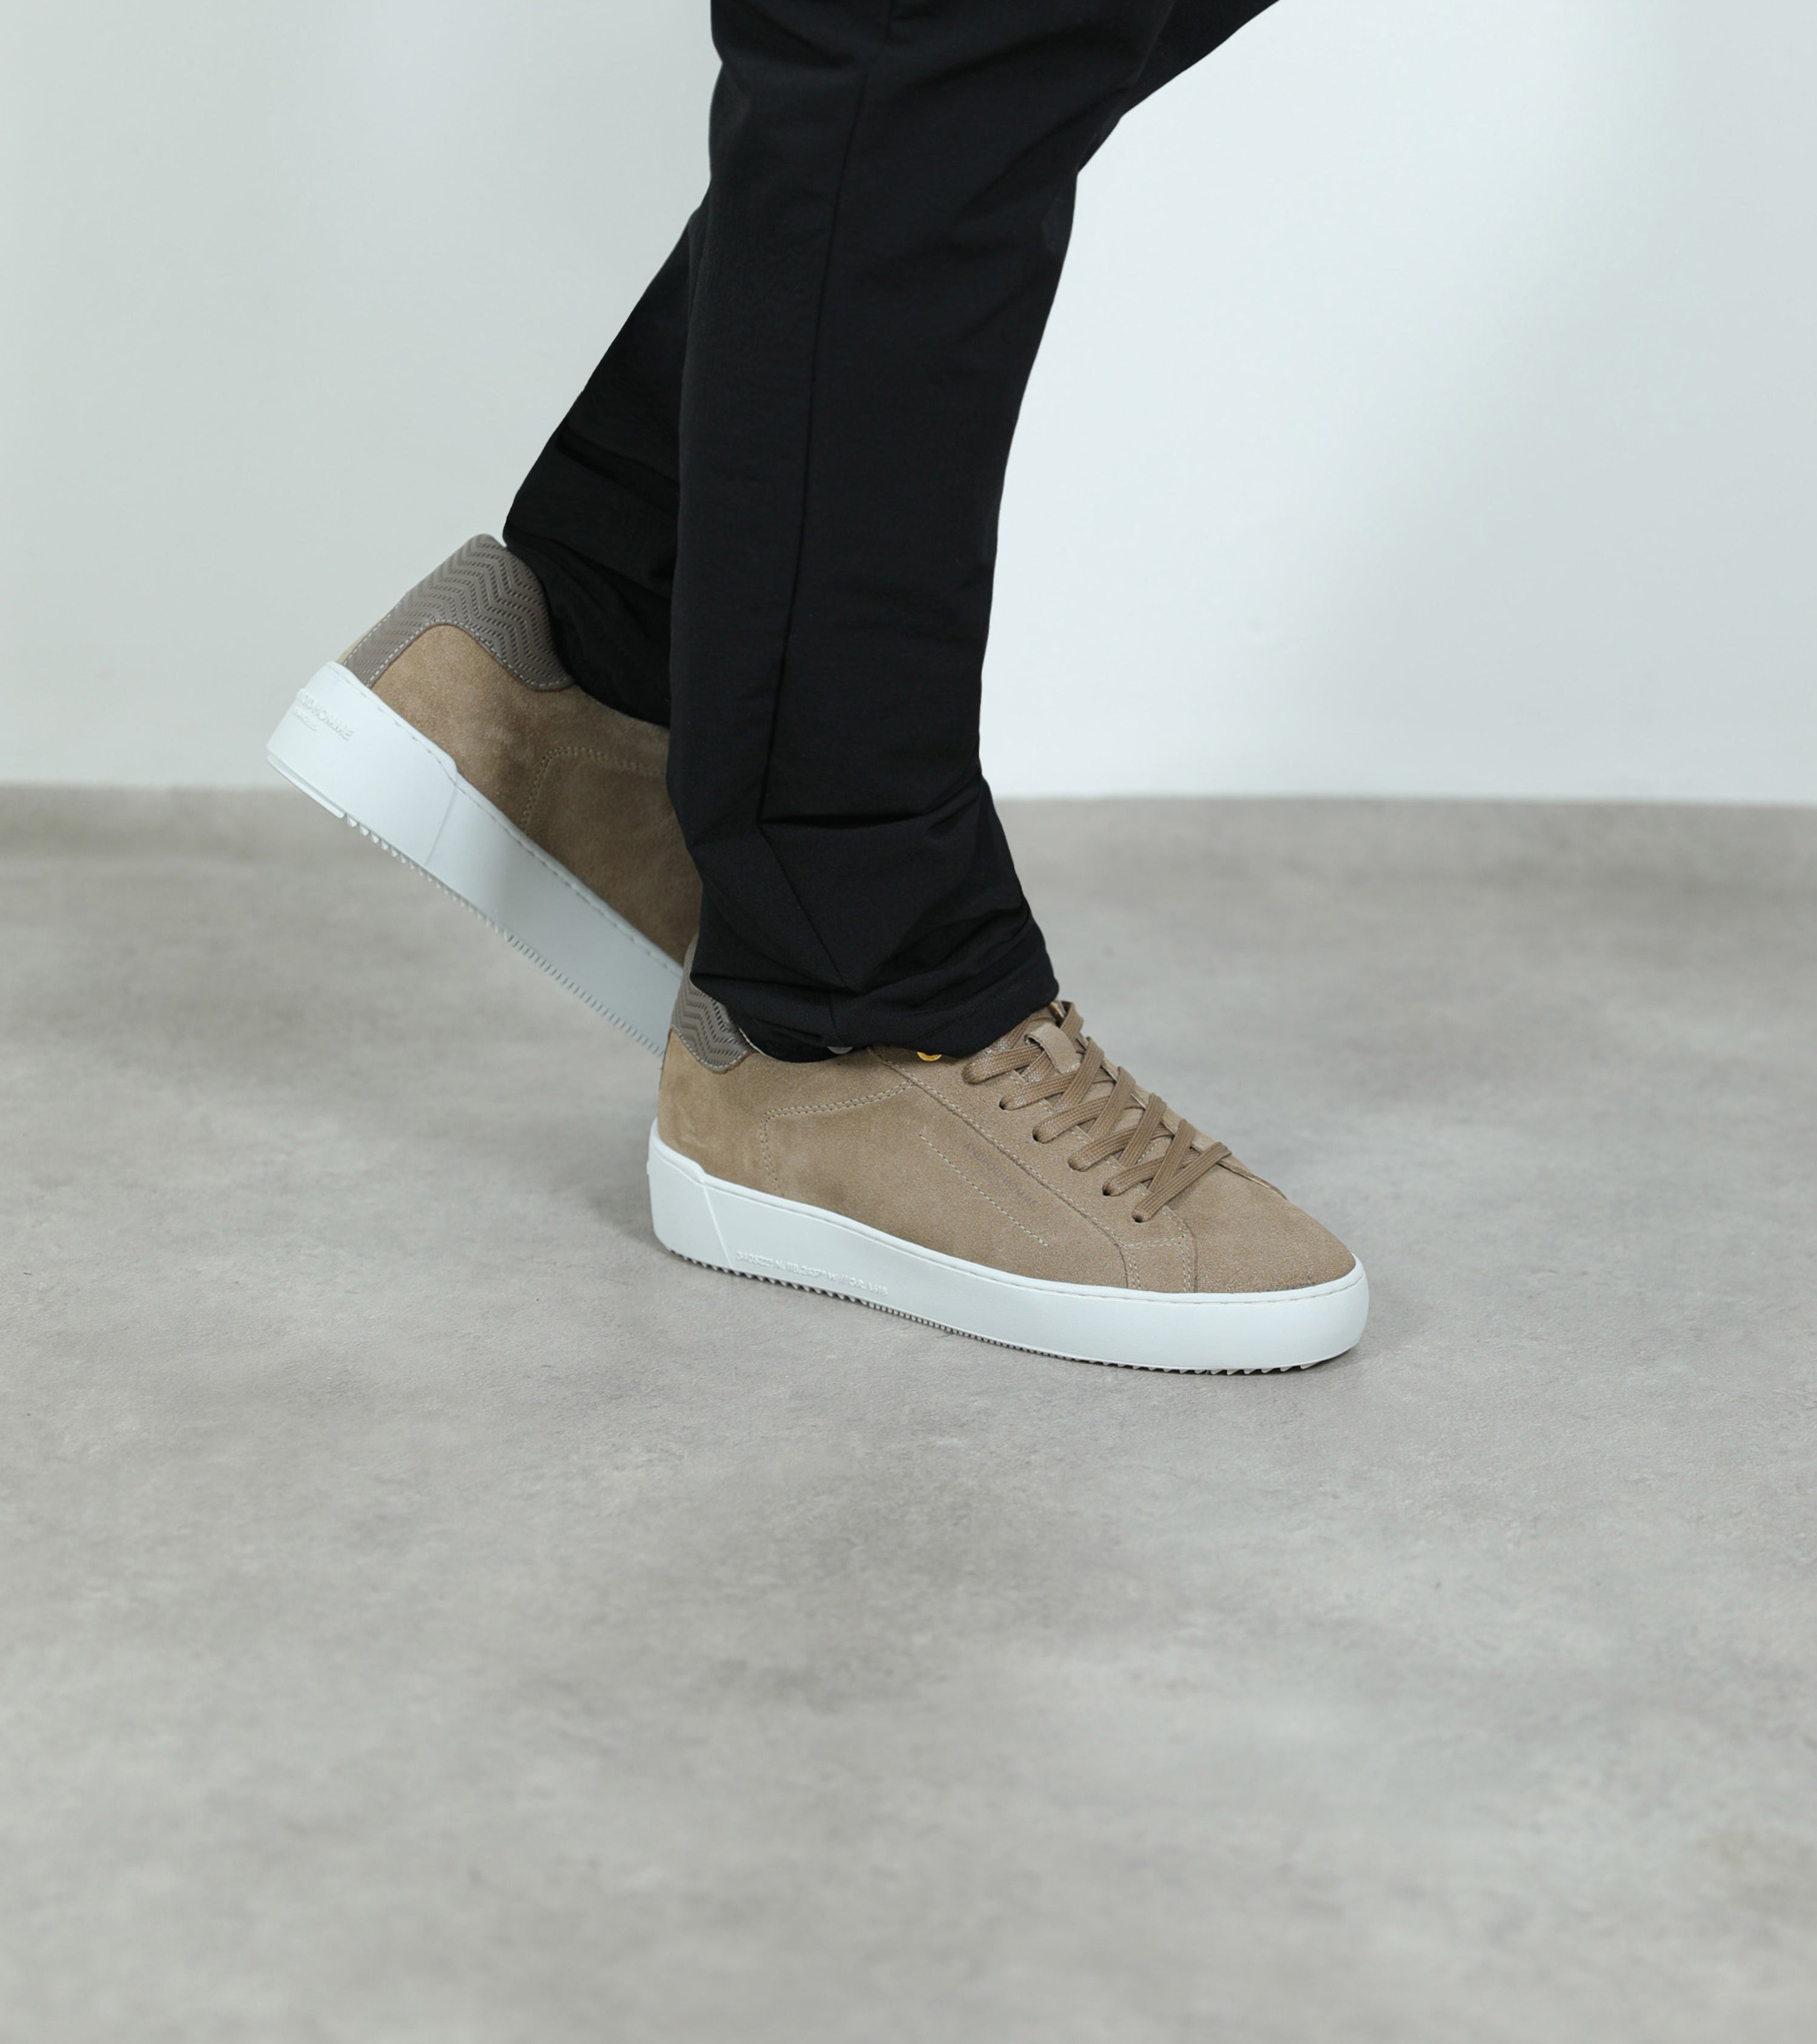 Ecom imagery of the Zuma Taupe Suede Zig Zag Leather Android Homme Trainers on foot.